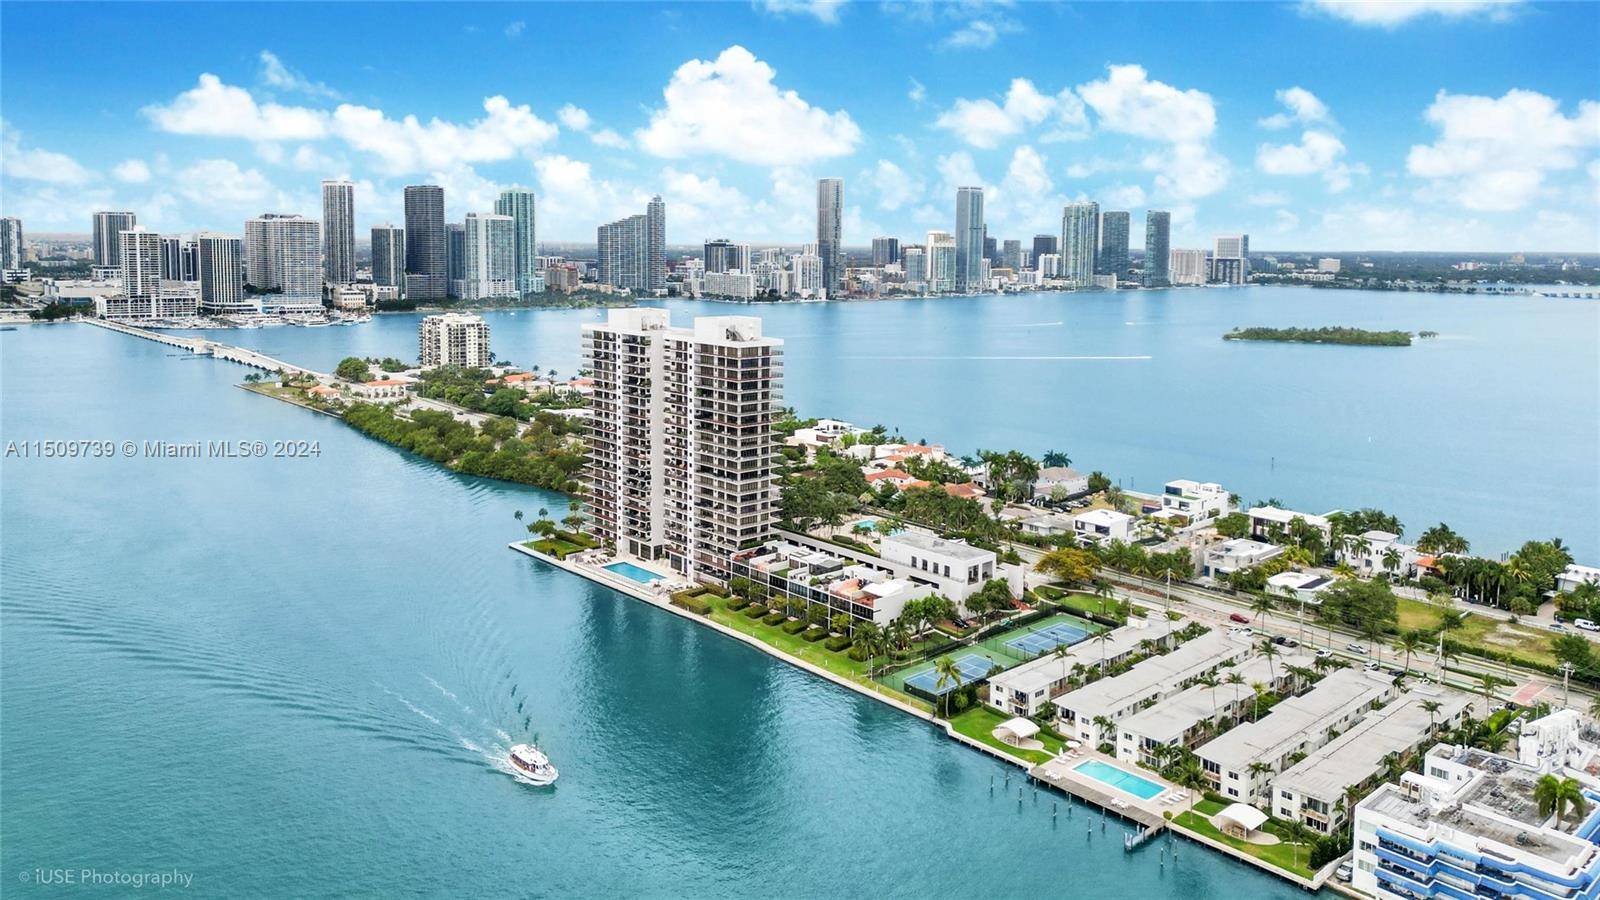 Stylish, 3 bedroom, 2. 5 bathroom 2, 010 flow through unit offers breathtaking views of downtown Miami and the Intracoastal with oversized balconies.